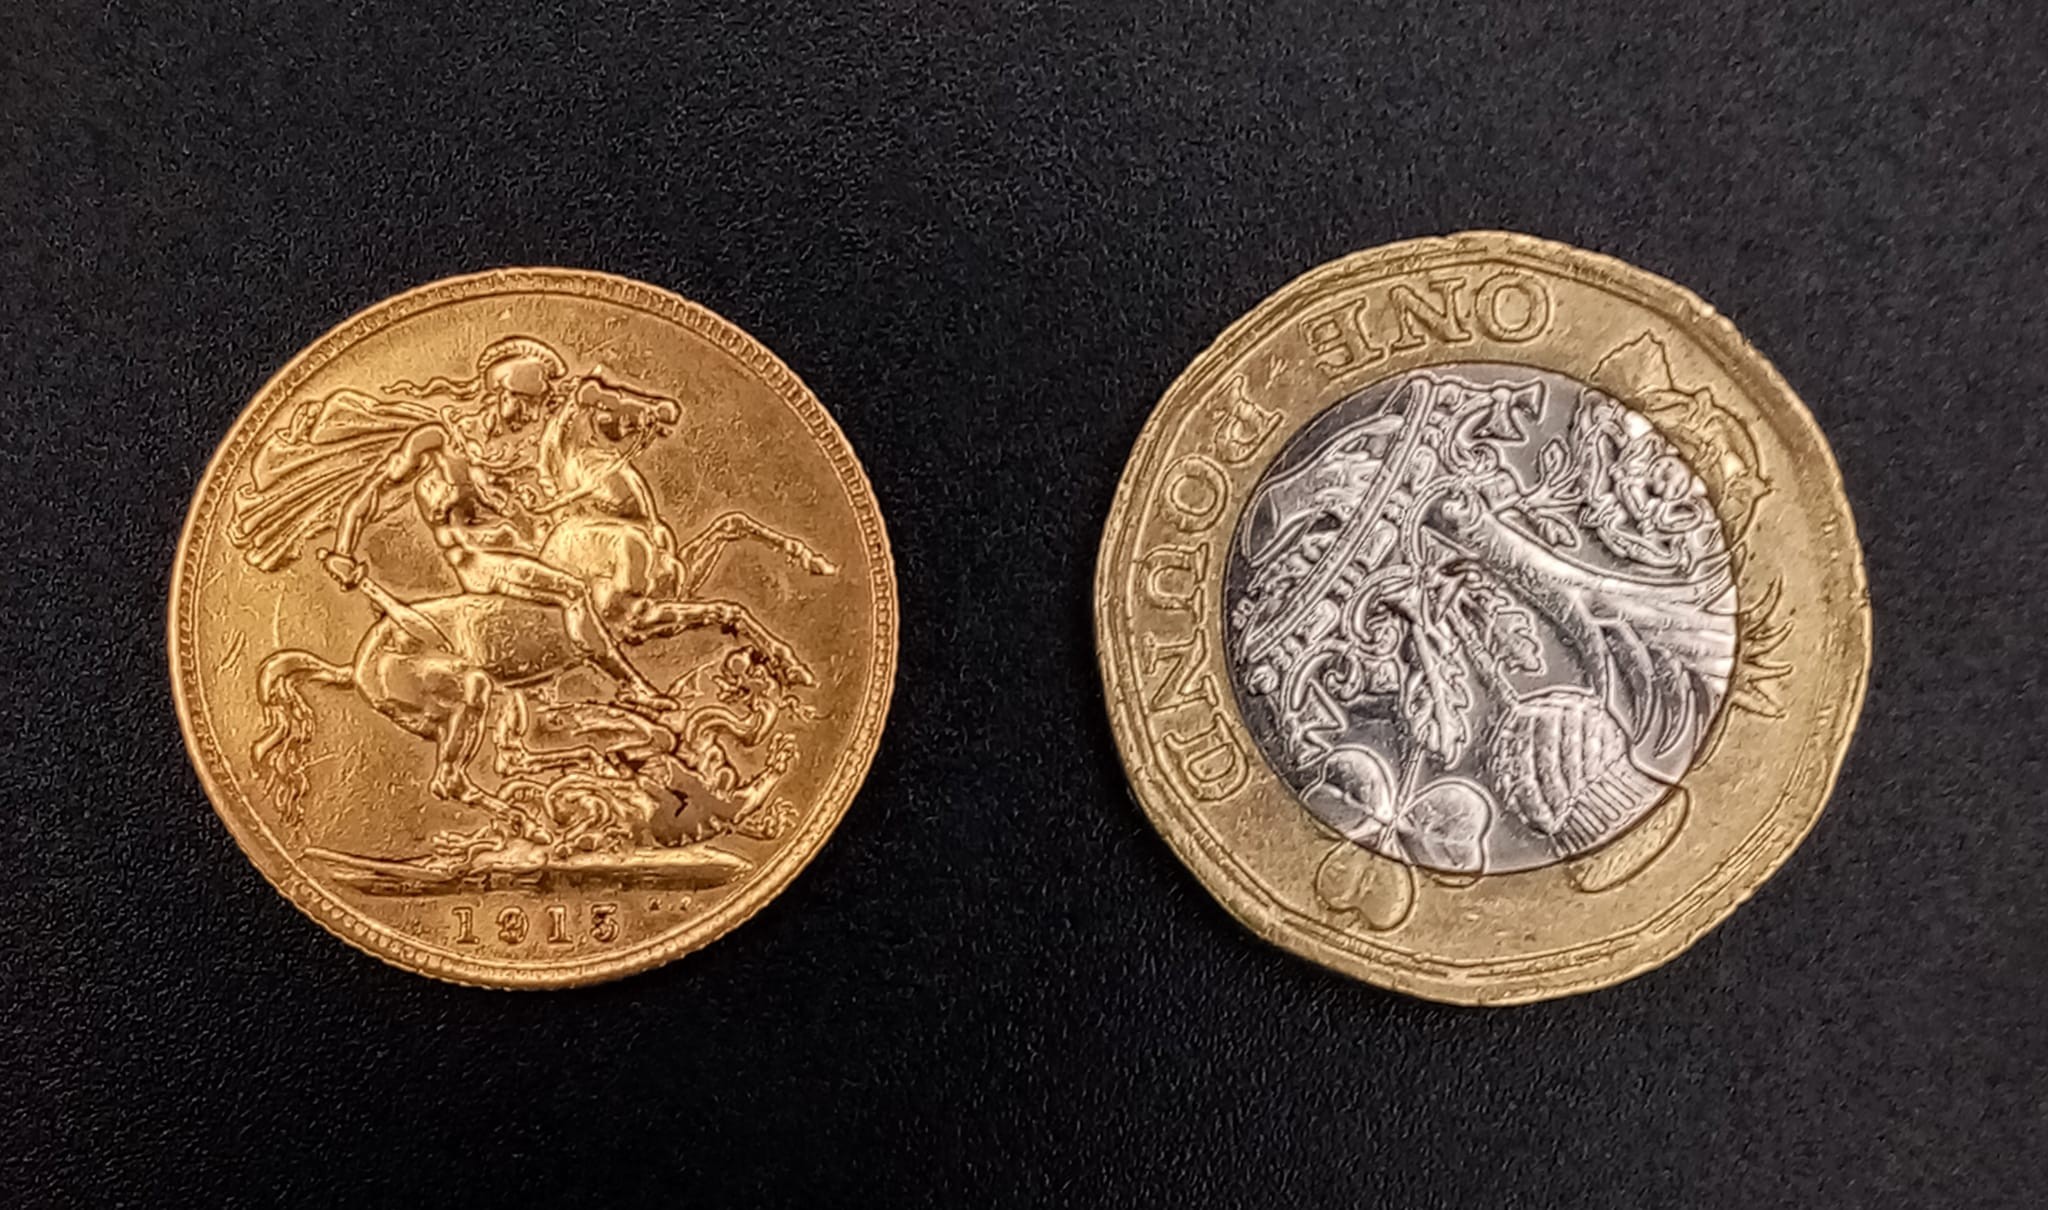 A 22K GOLD SOVEREIGN DATED 1915 FROM THE REIGN OF KING GEORGE V , IN VERY GOOD CONDITION . 8gms - Image 3 of 3